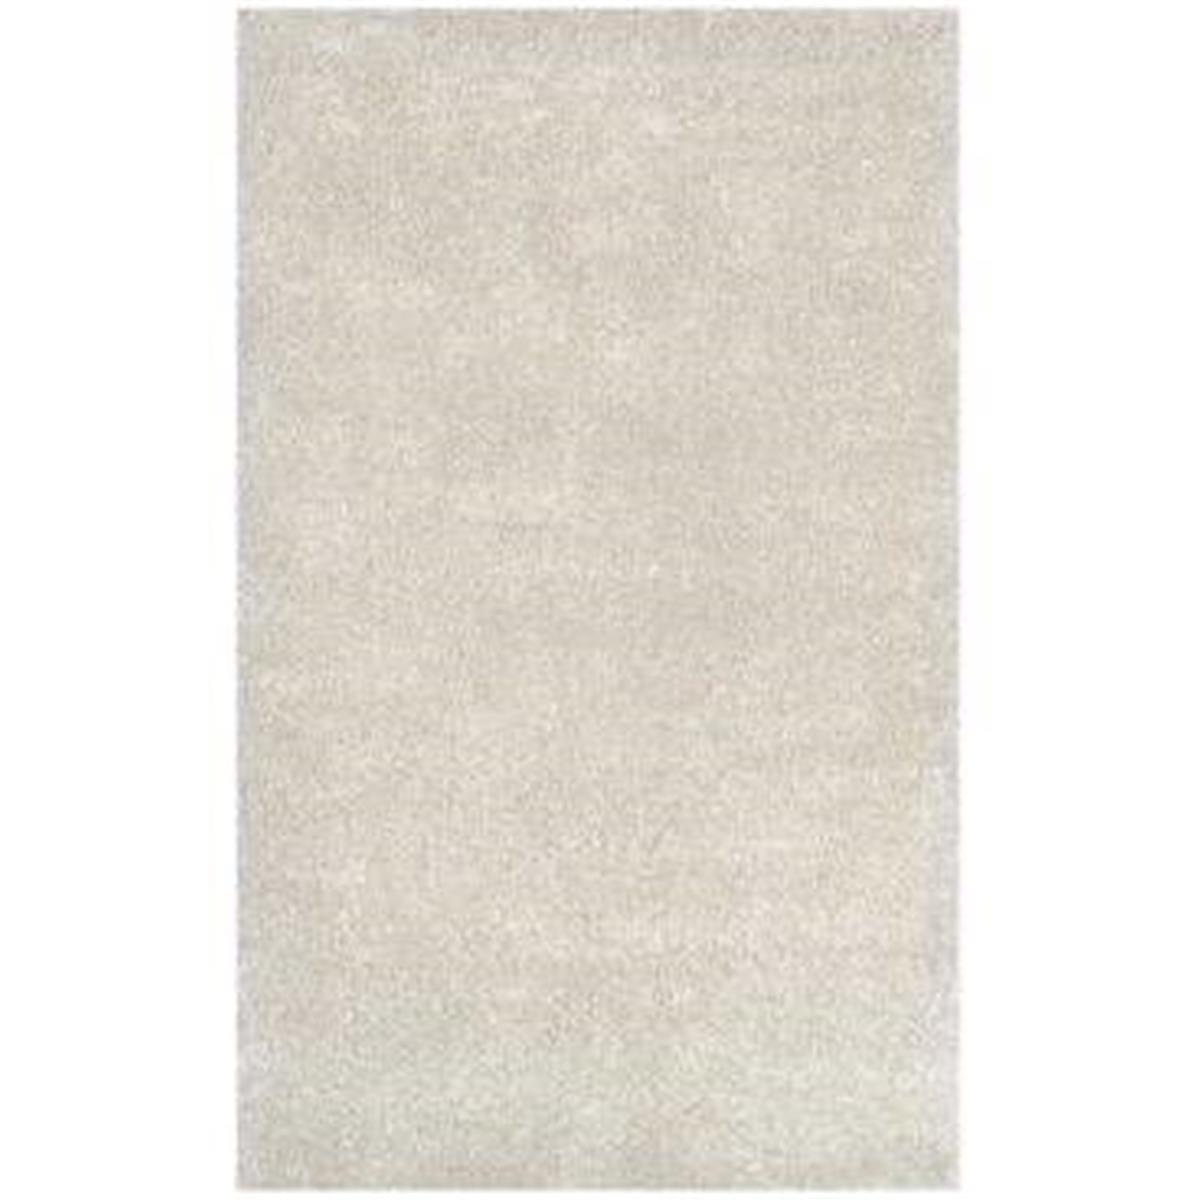 43110110092129t 9 Ft. 2 In. X 12 Ft. 9 In. Bromley Breckenridge Rug - Frost